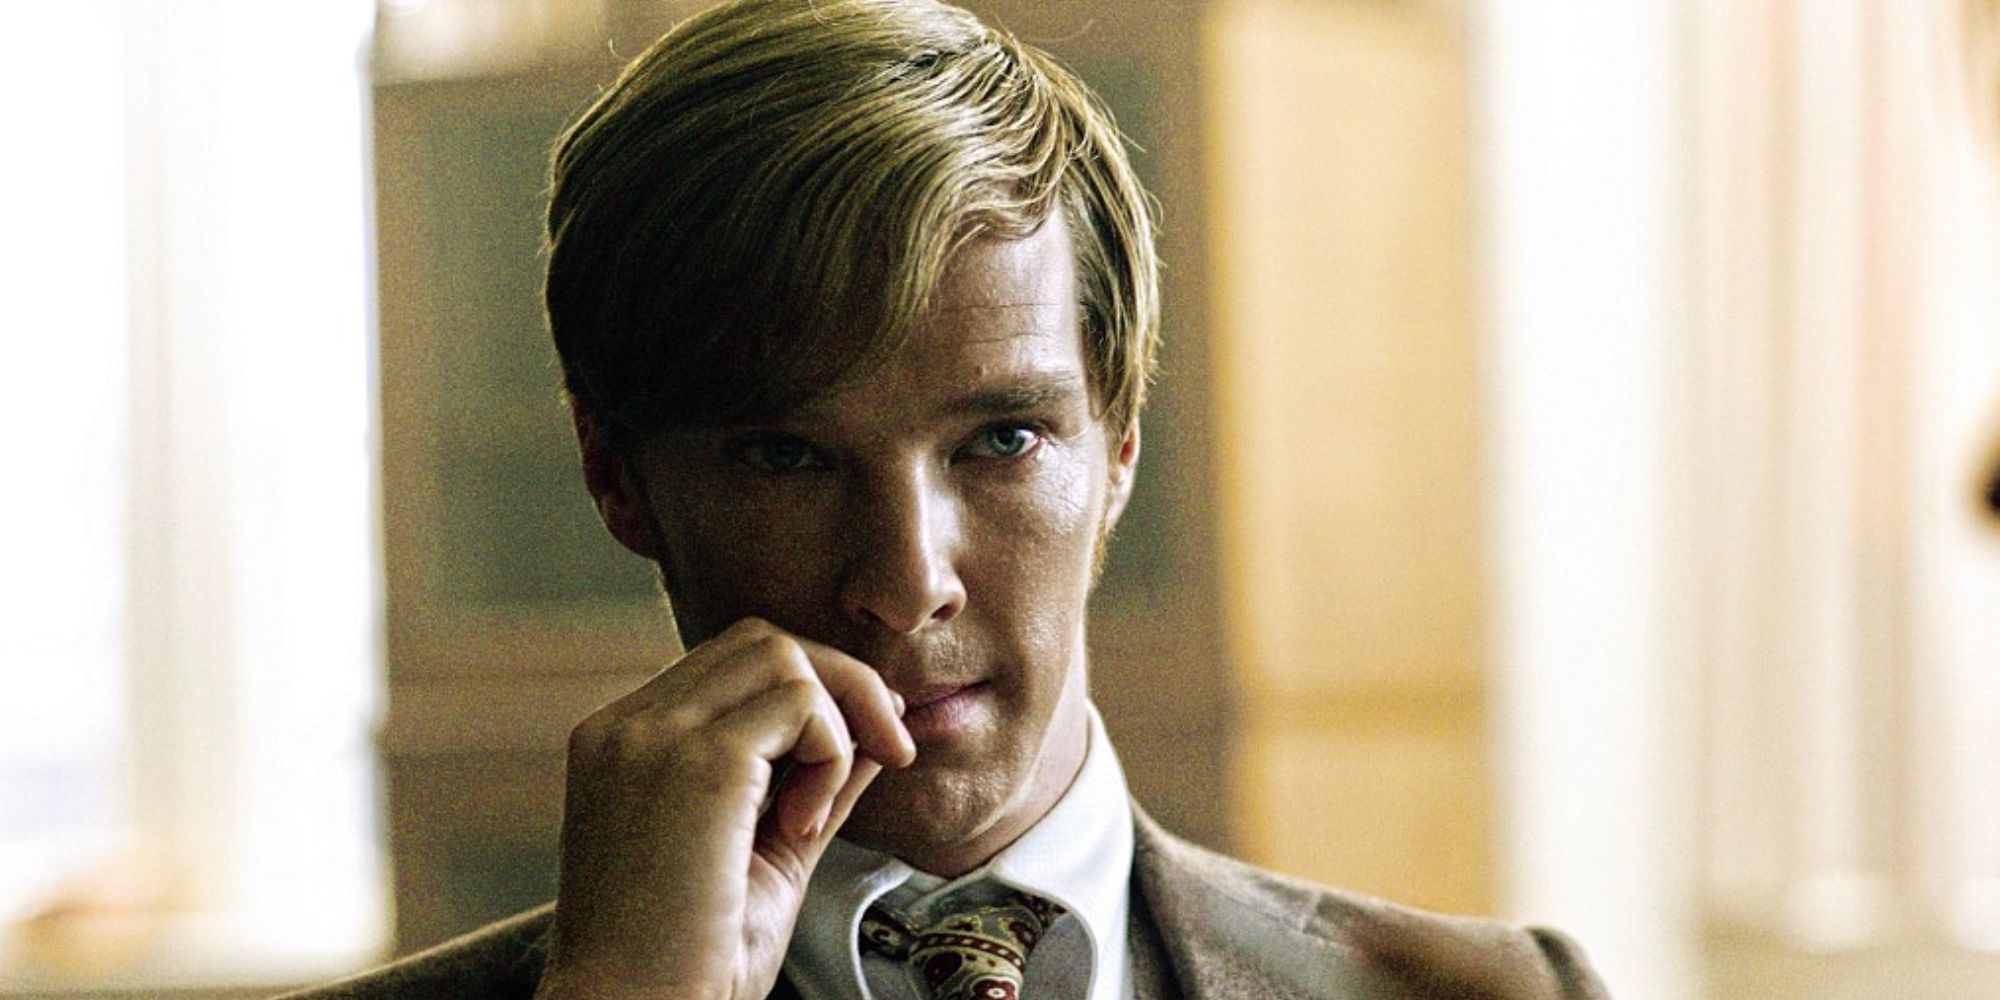 Benedict Cumberbatch as Peter in Tinker Tailor Soldier Spy